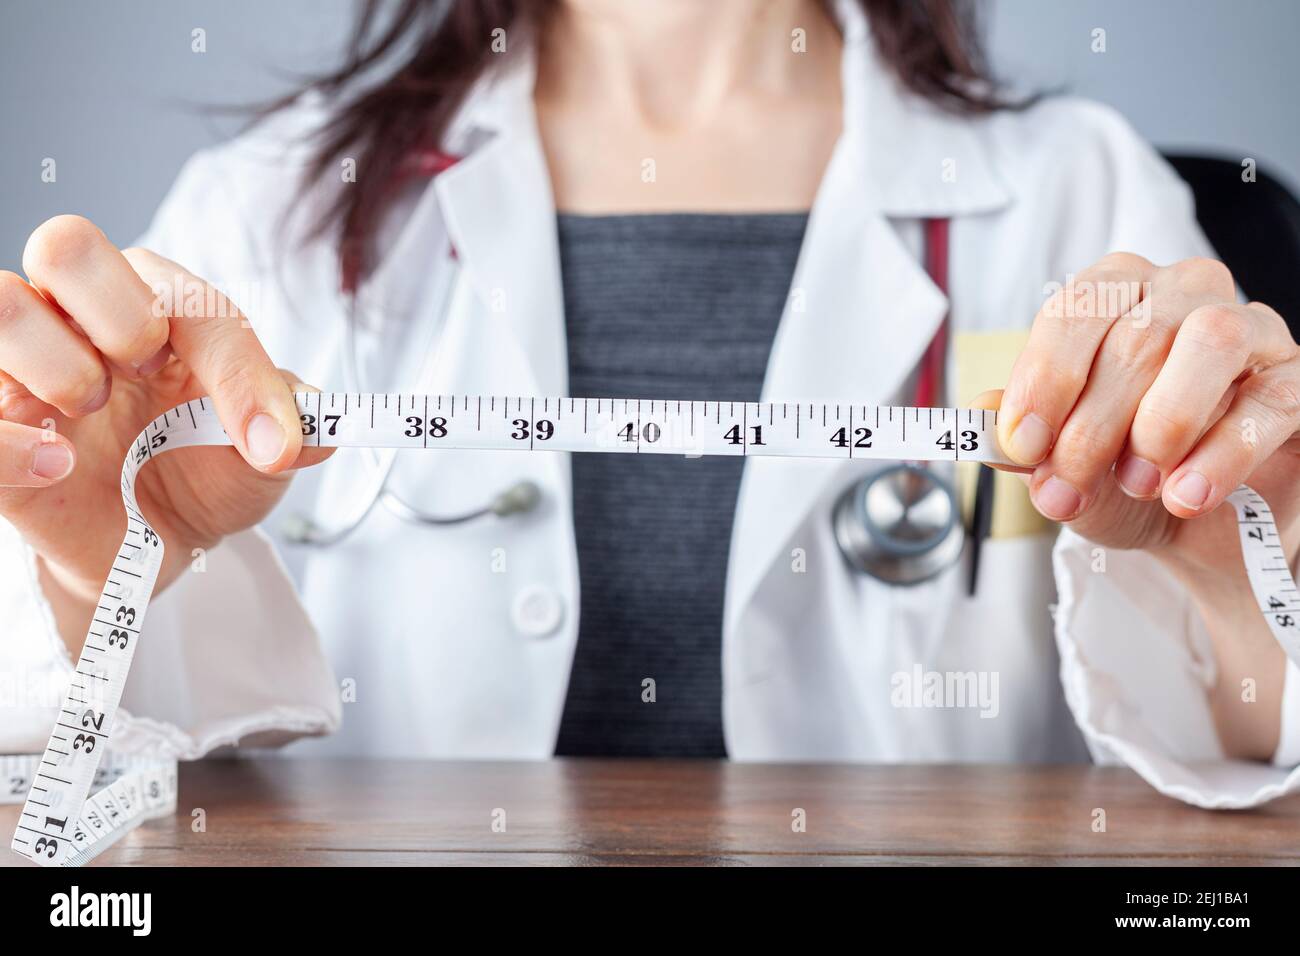 Close up isolated image of a caucasian doctor holding a tape measure in her hands which shows 40 inches as abdominal circumference upper limit in heal Stock Photo